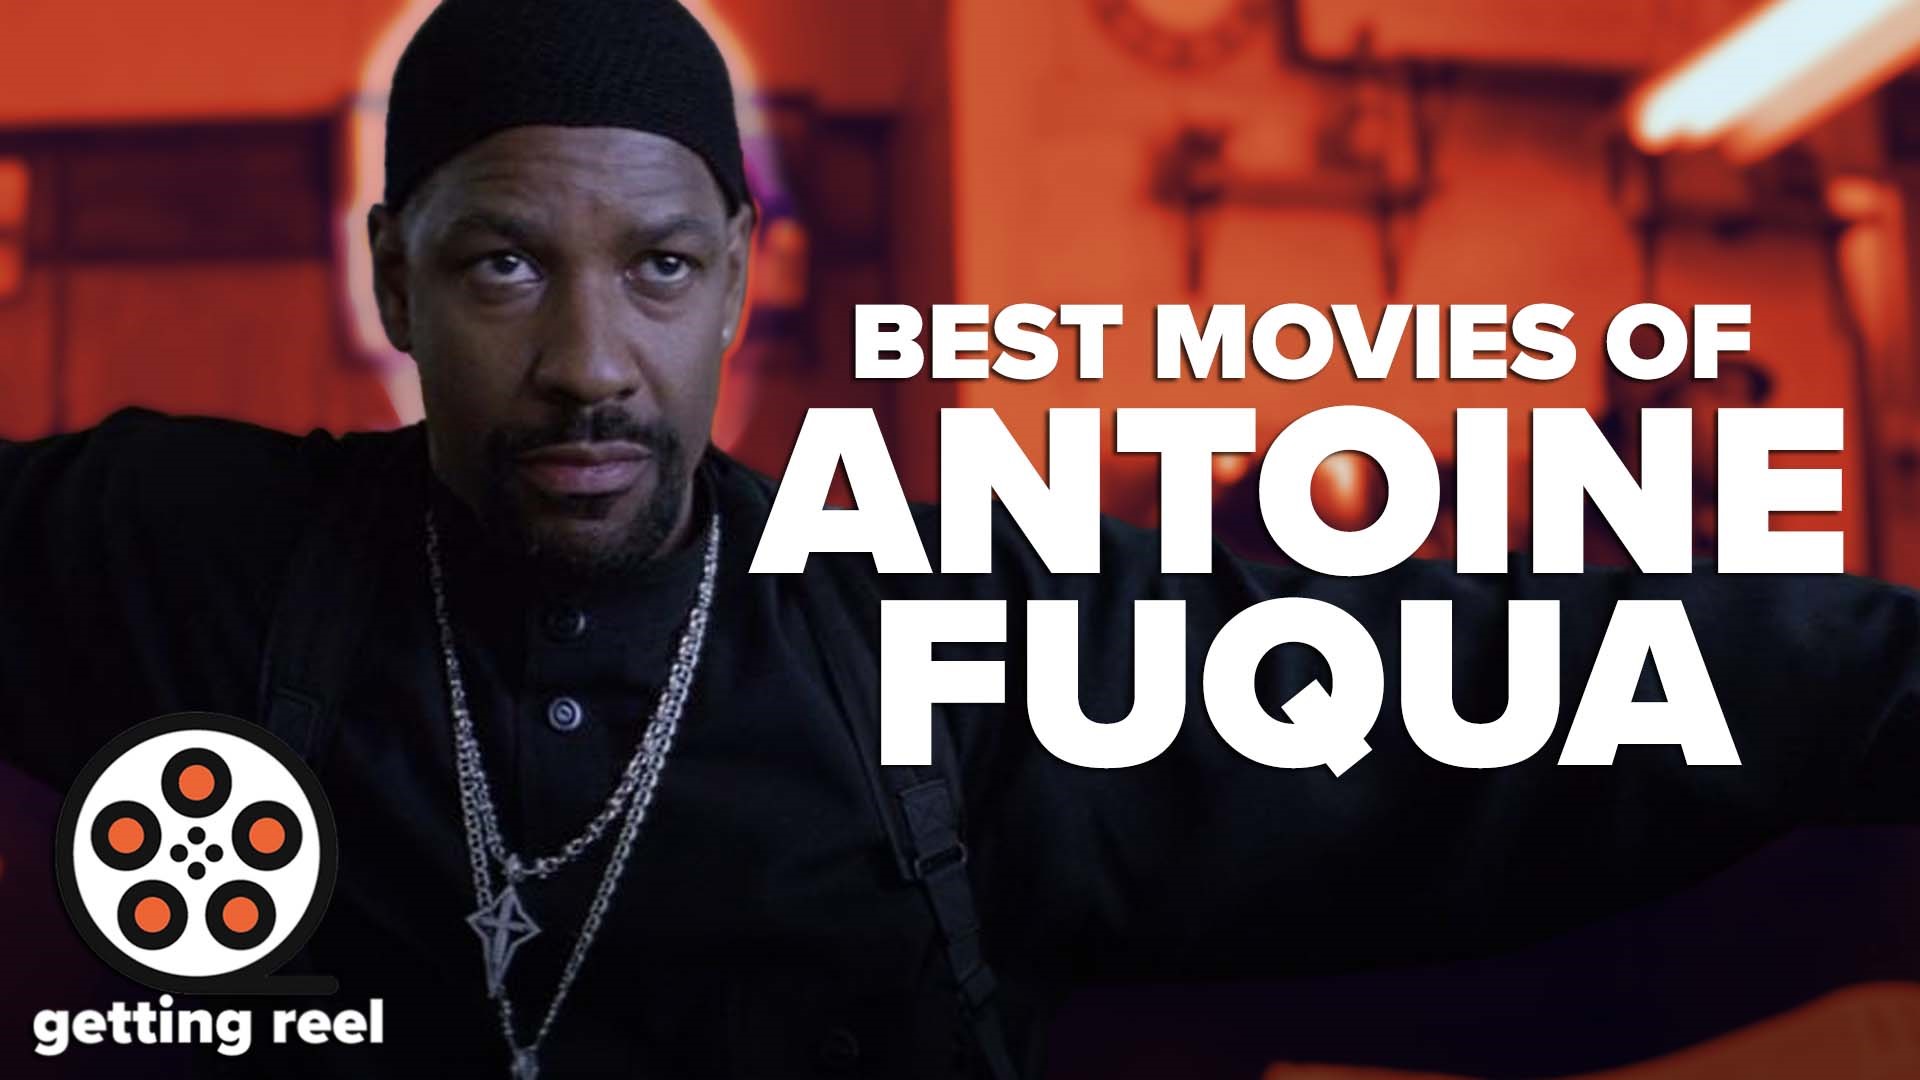 We break down the five best Antoine Fuqua movies ahead of The Equalizer 3 and why Infinite is absolutely not one of his best.